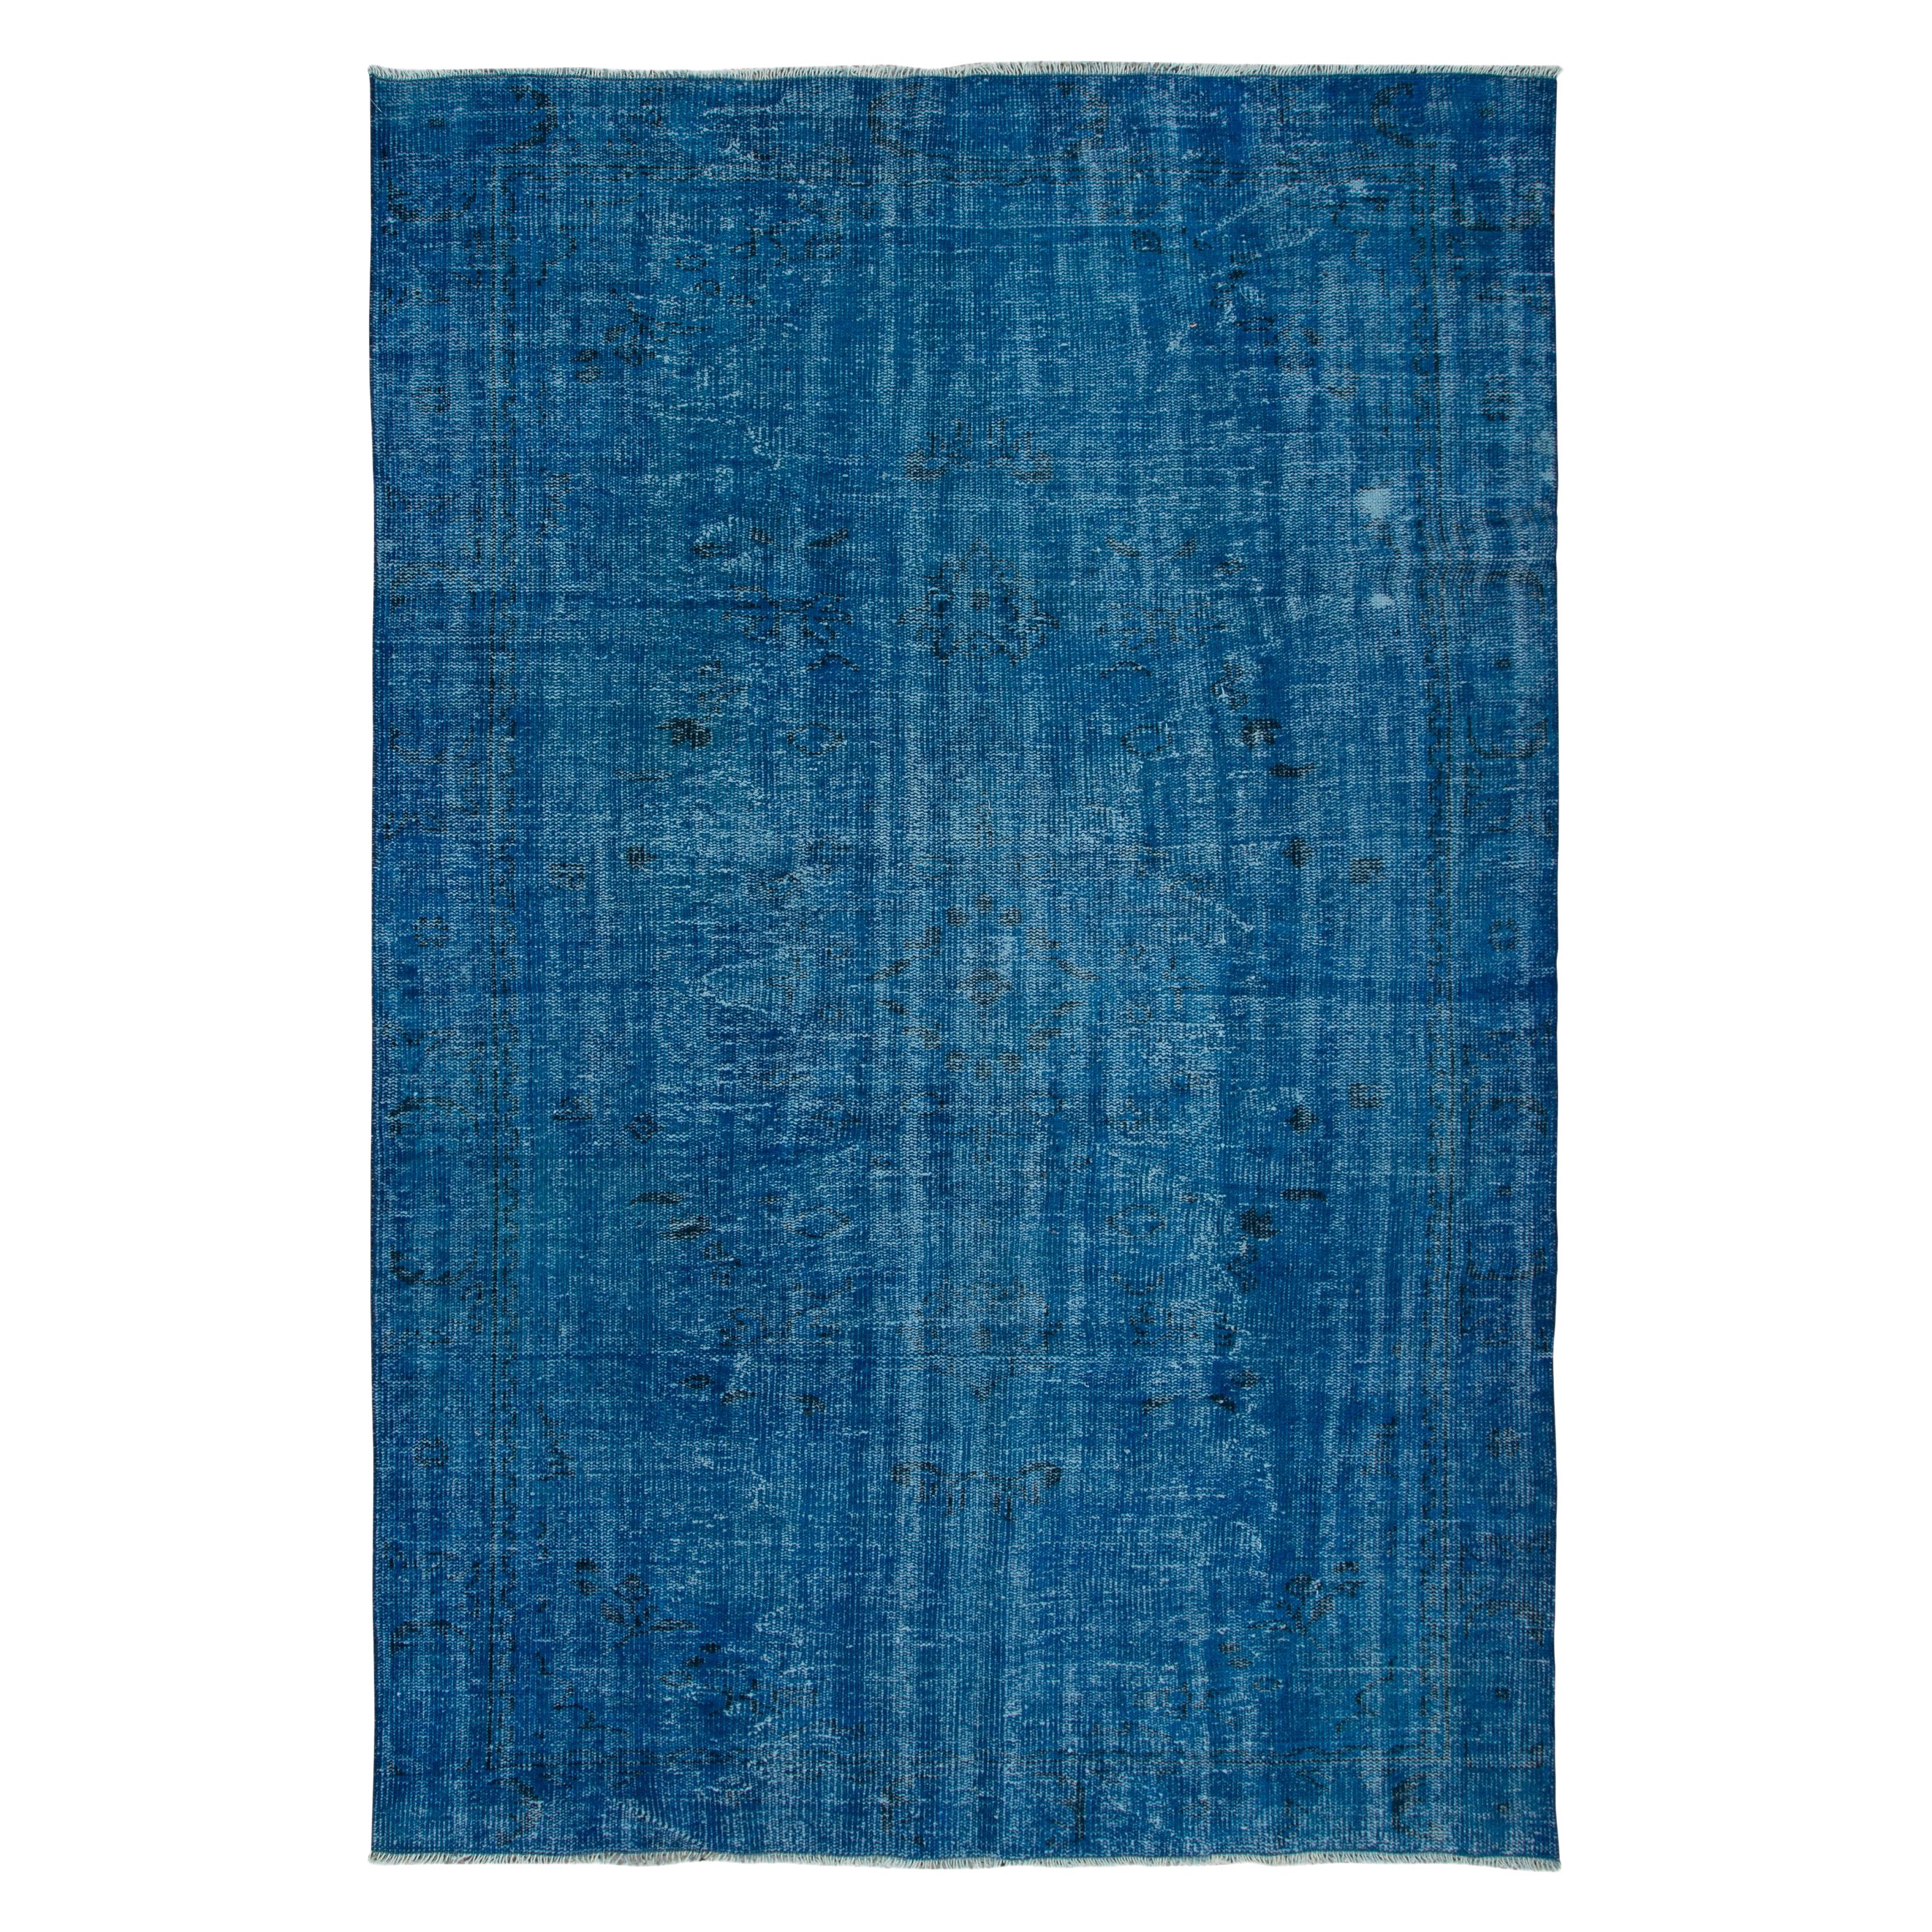 6x8.8 Ft Traditional Handmade Area Rug in Blue, Modern Turkish Redyed Carpet For Sale